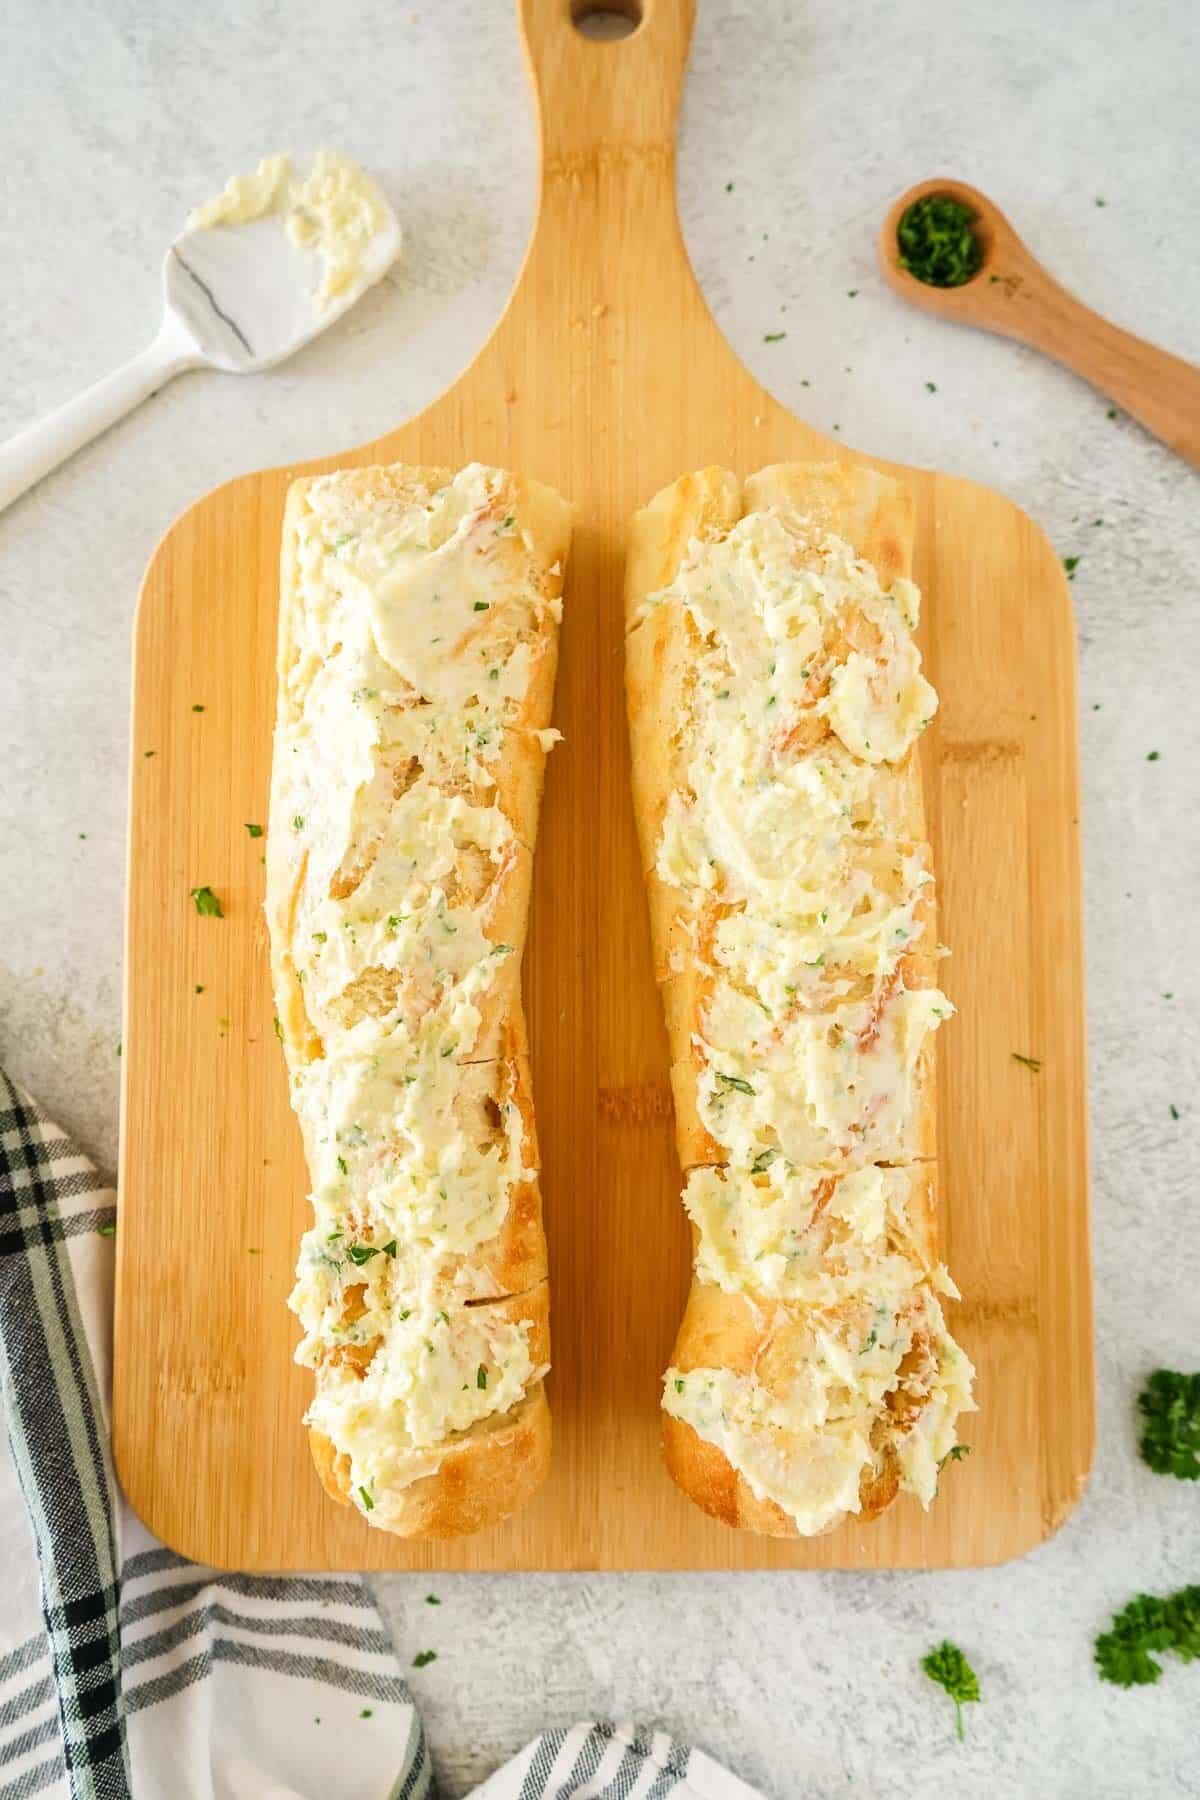 Baguette slathered with the garlic butter mixture.